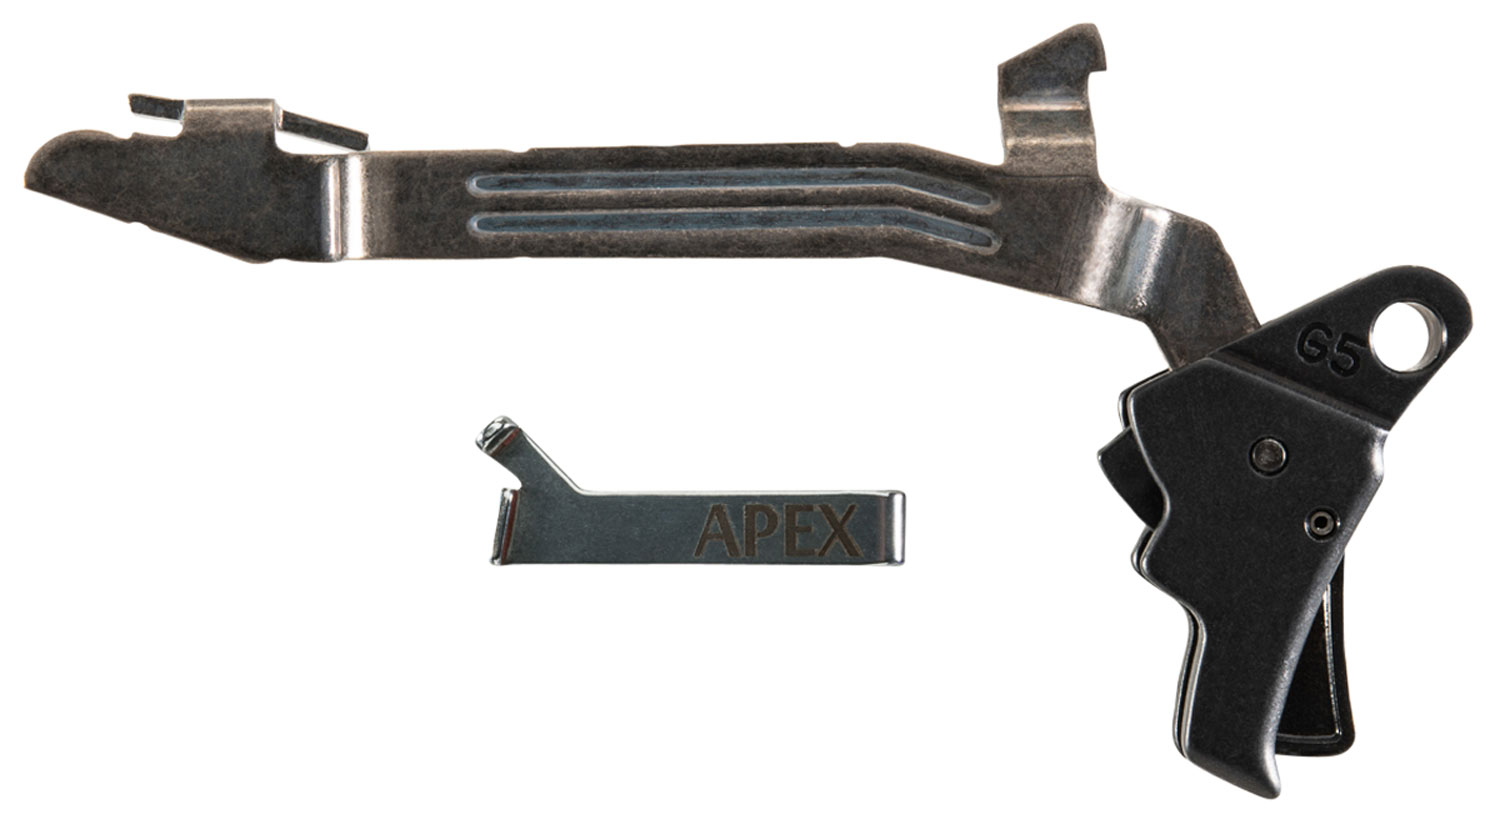 Apex Tactical 102116 Action Enhancement Trigger Kit Drop-in Trigger with Apex Trigger Bar & Black Finish for Glock 17/19/19x/26/34/45 Gen5